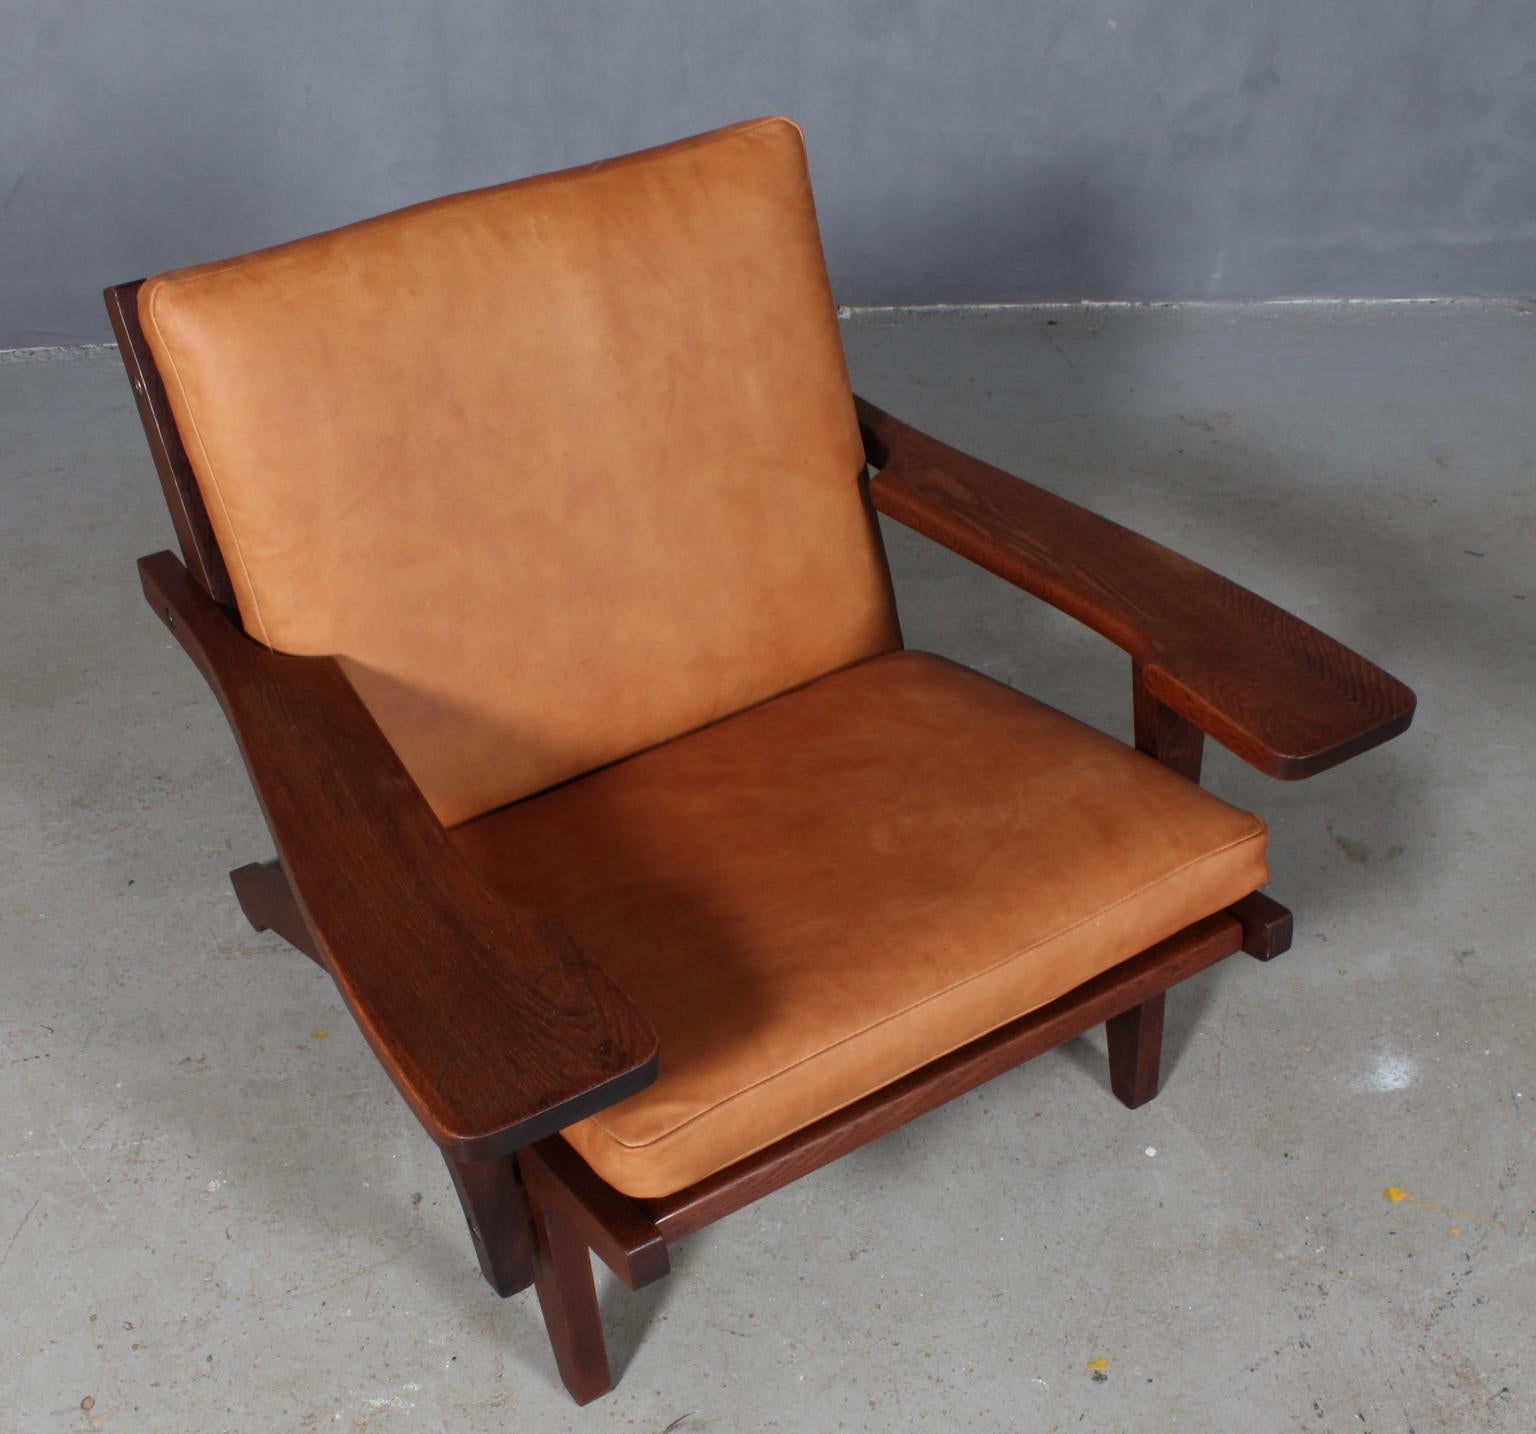 Hans J. Wegner lounge chair with loose cushions new upholstered with tan aniline leather.

Frame of smoked oak. With armrests.

Model GE-370, made by GETAMA.